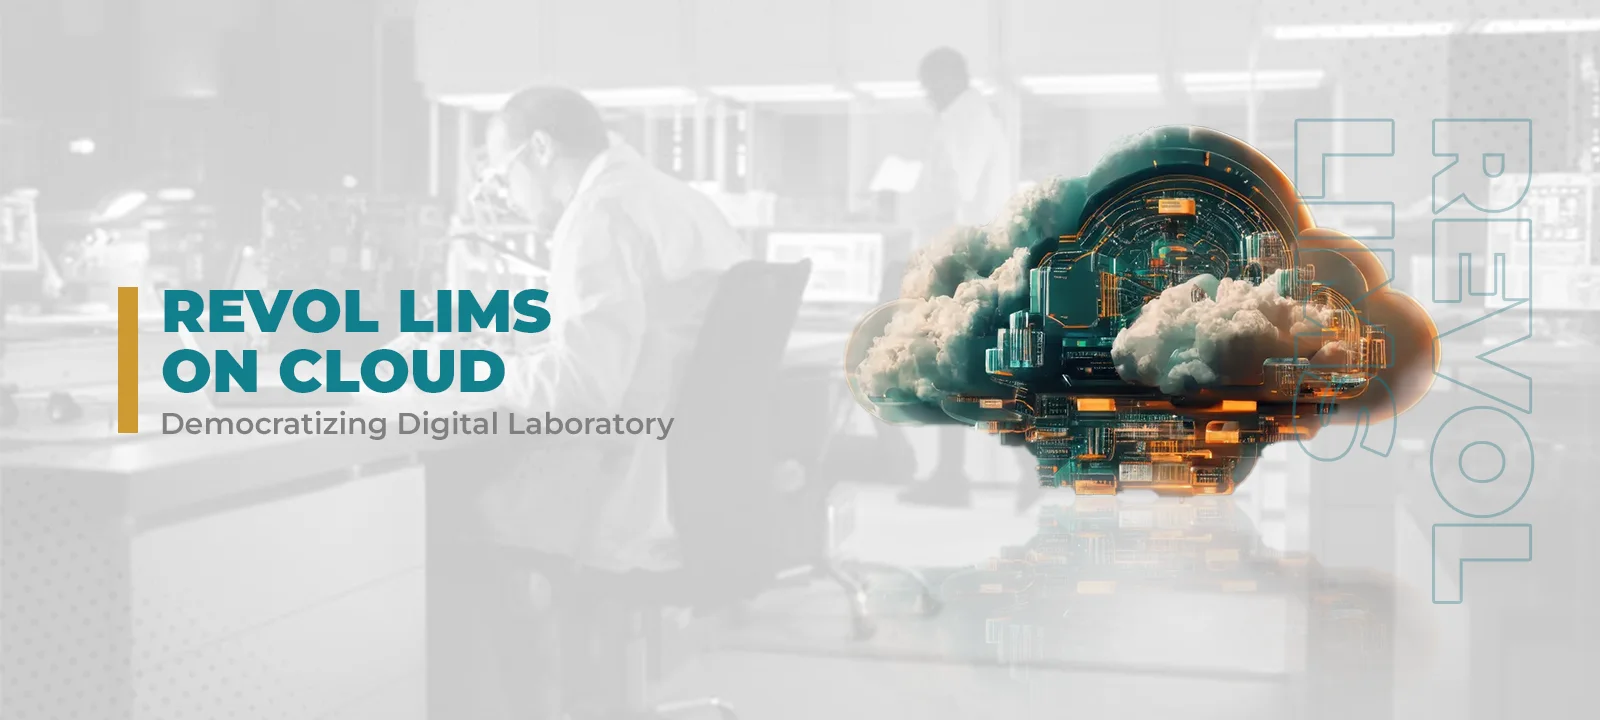 An image represents the modern and efficient approach to managing laboratory information through cloud-based LIMS.